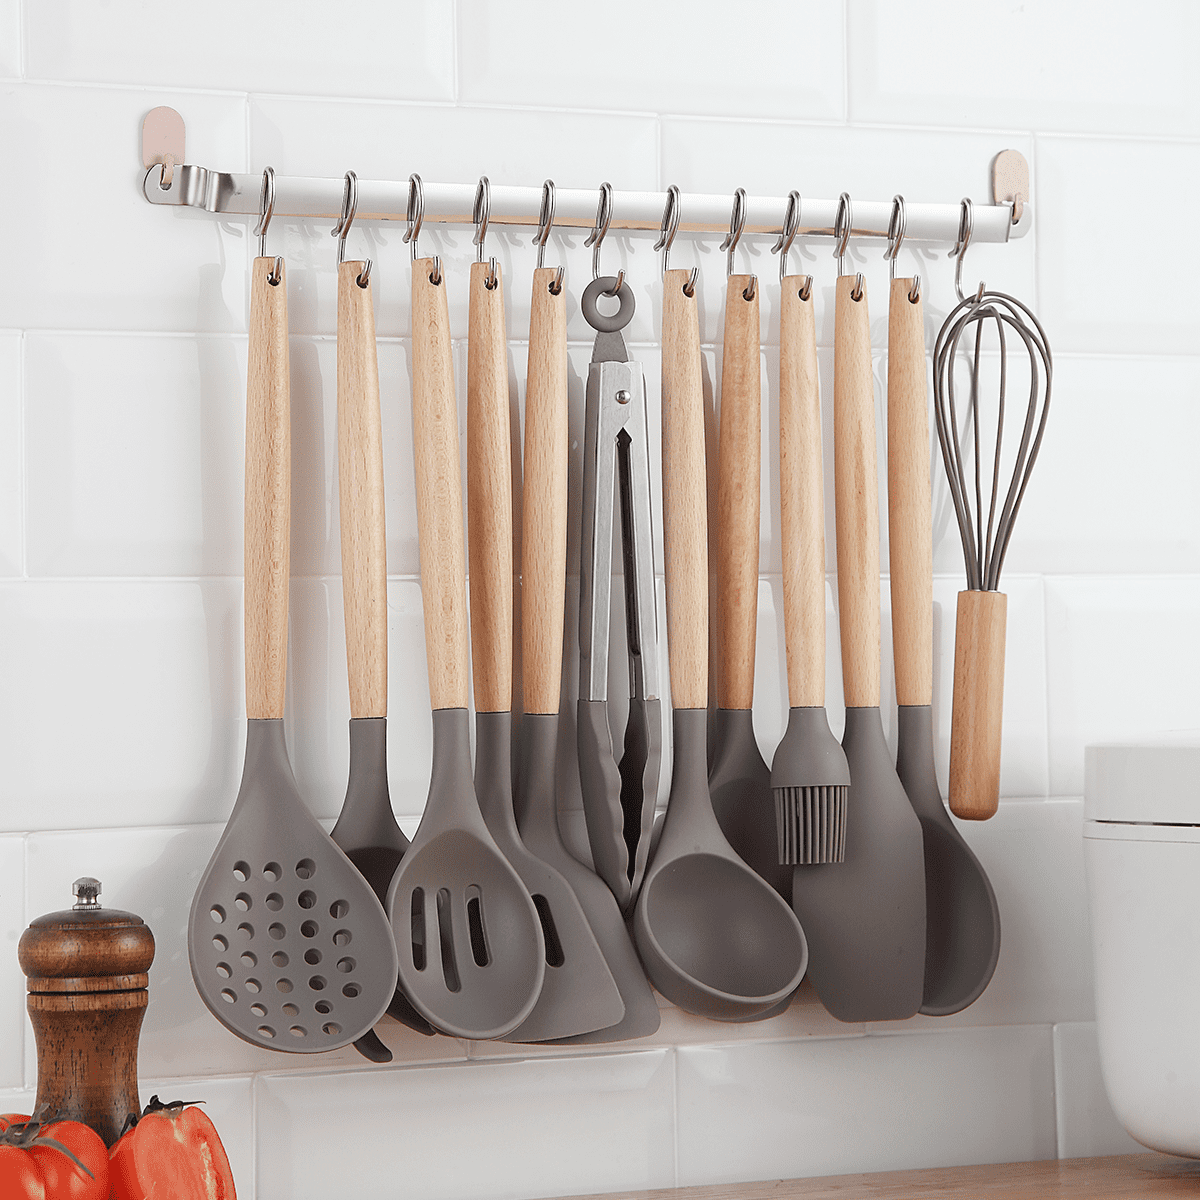 ebeau Cooking Utensils Set with Holder - 32 Pcs Silicone Kitchen Utensils  Set - Non-Stick Silicone S…See more ebeau Cooking Utensils Set with Holder  